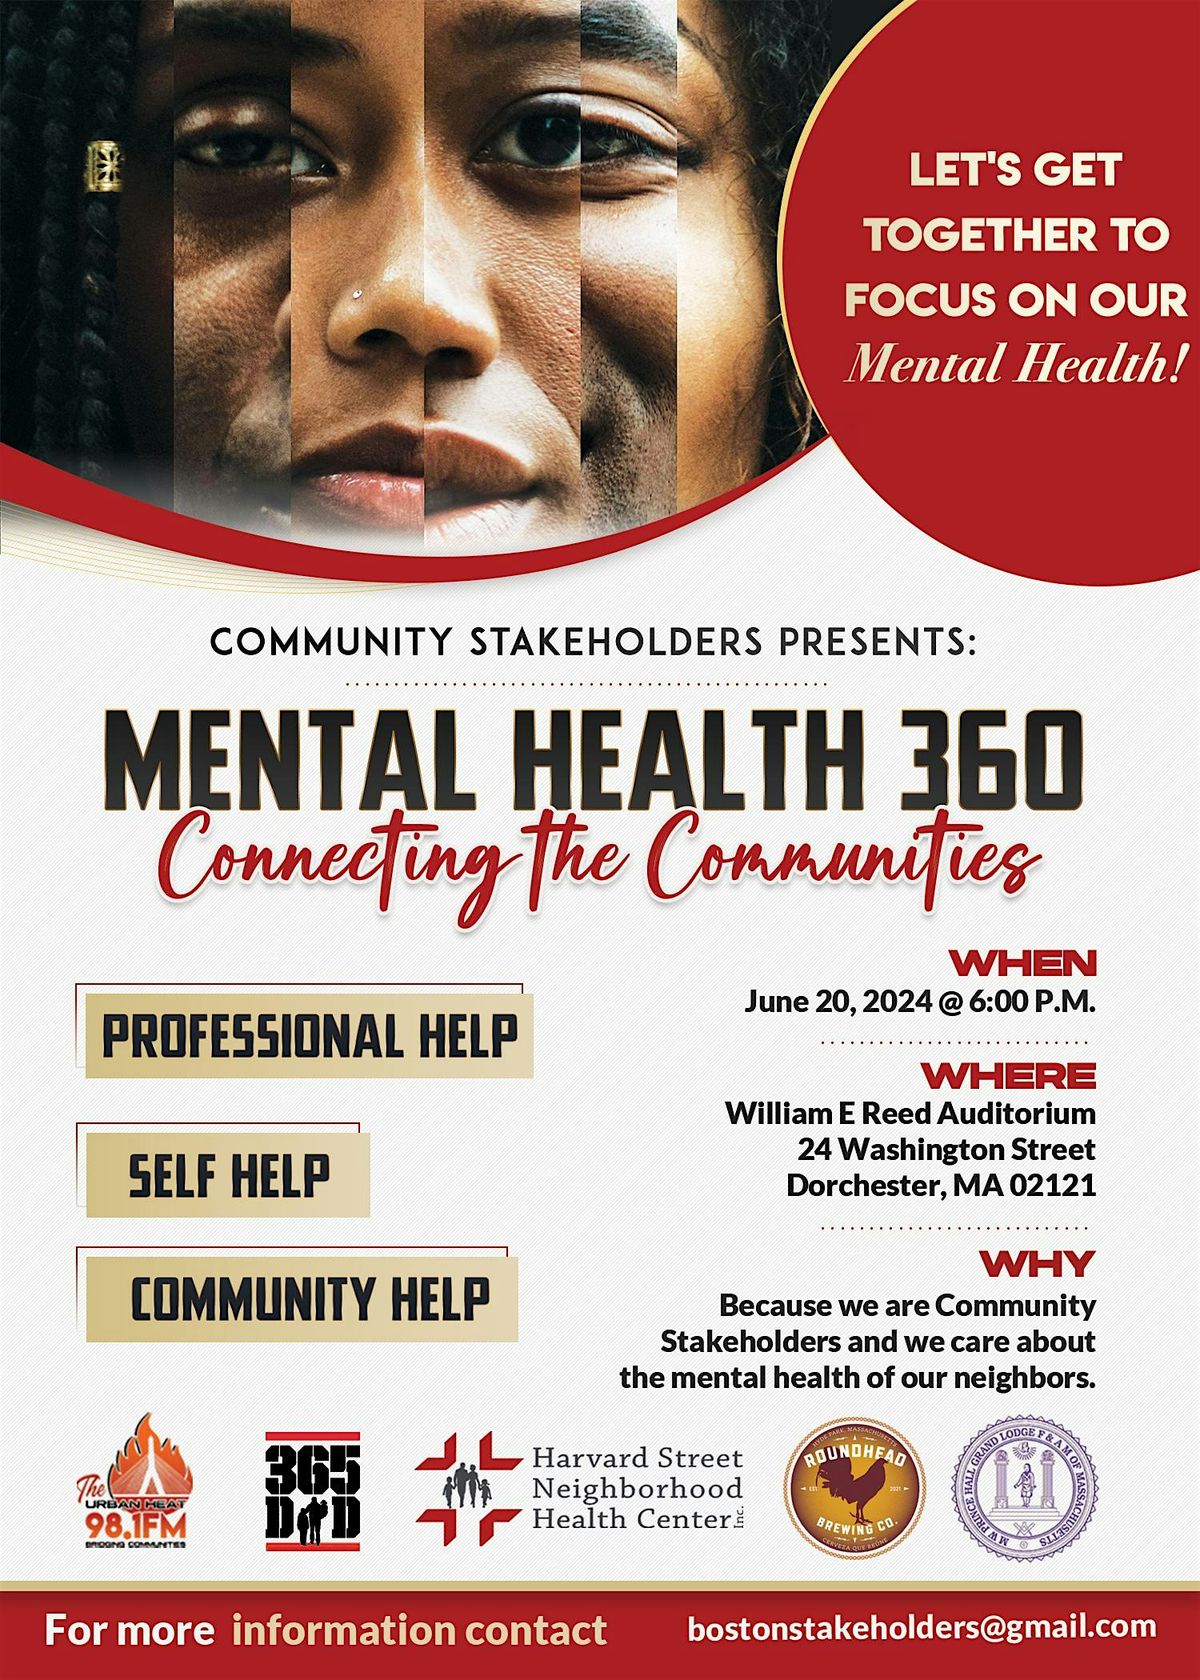 Boston Community Stakeholders Presents: Mental Health 360 -  Connecting Our Communities